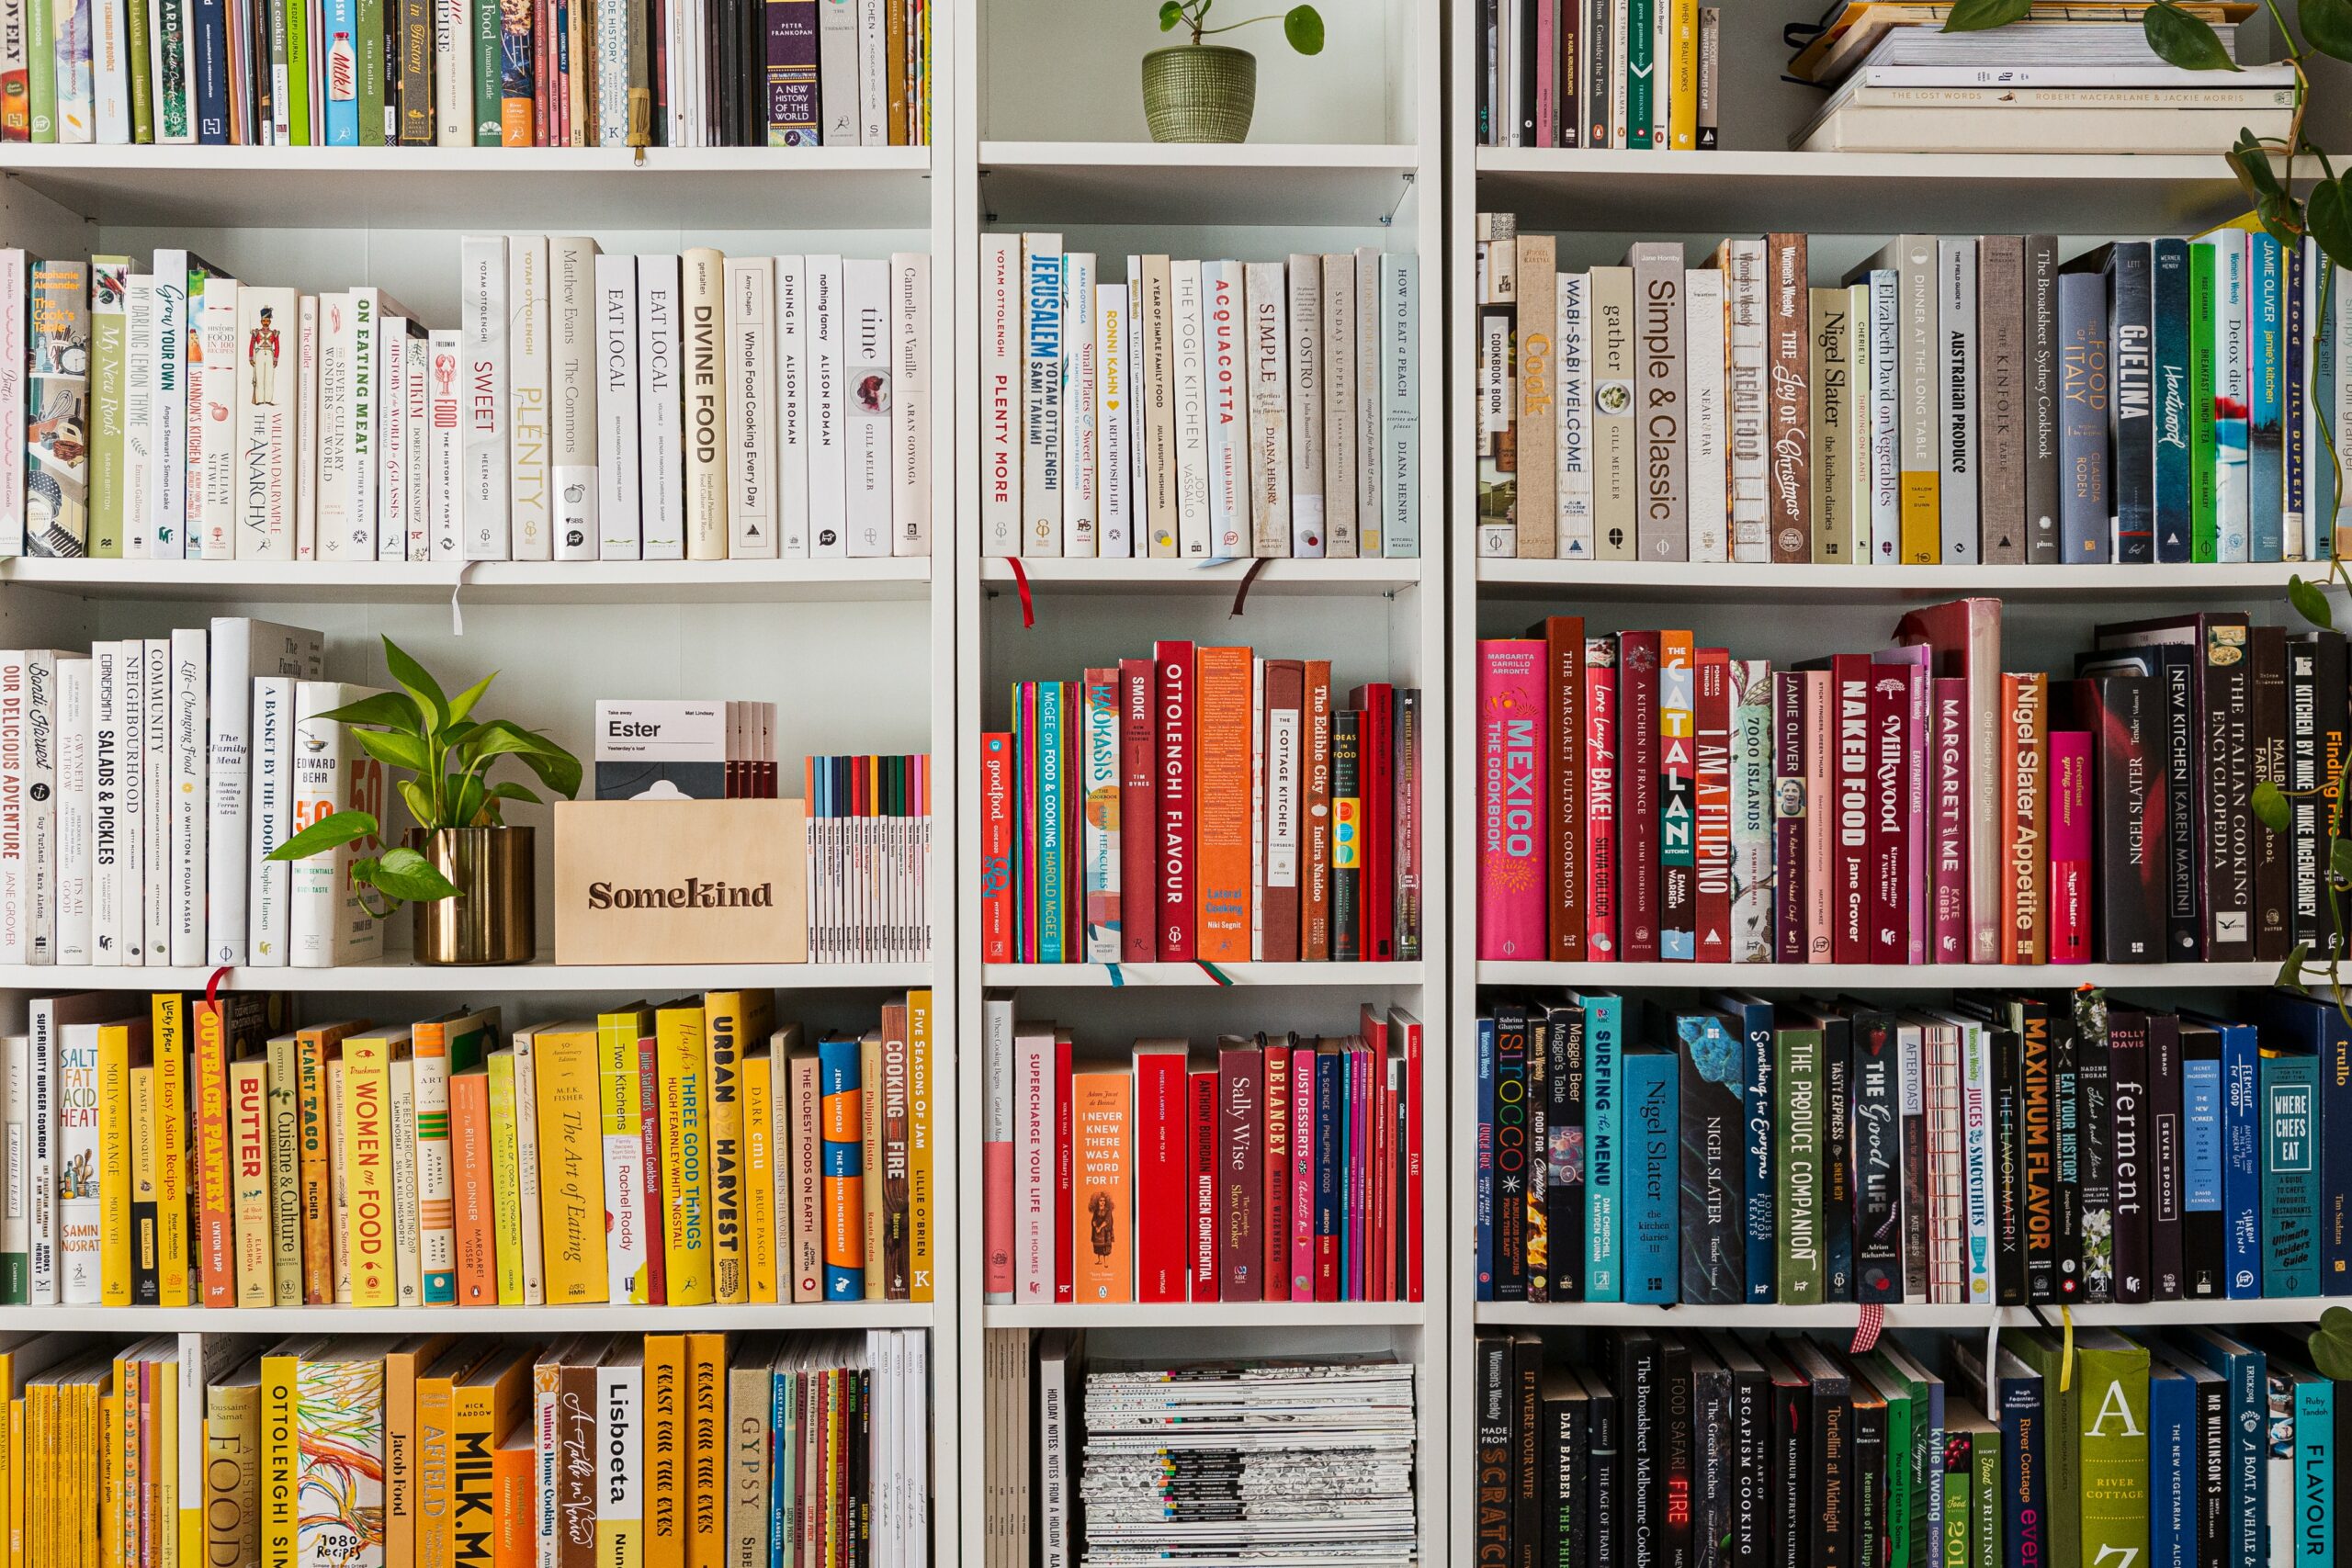 Bookshelves, Zoom Background, Food books, Food and words, Cookbooks, stacks of books, Zoom, colour-coded bookshelves